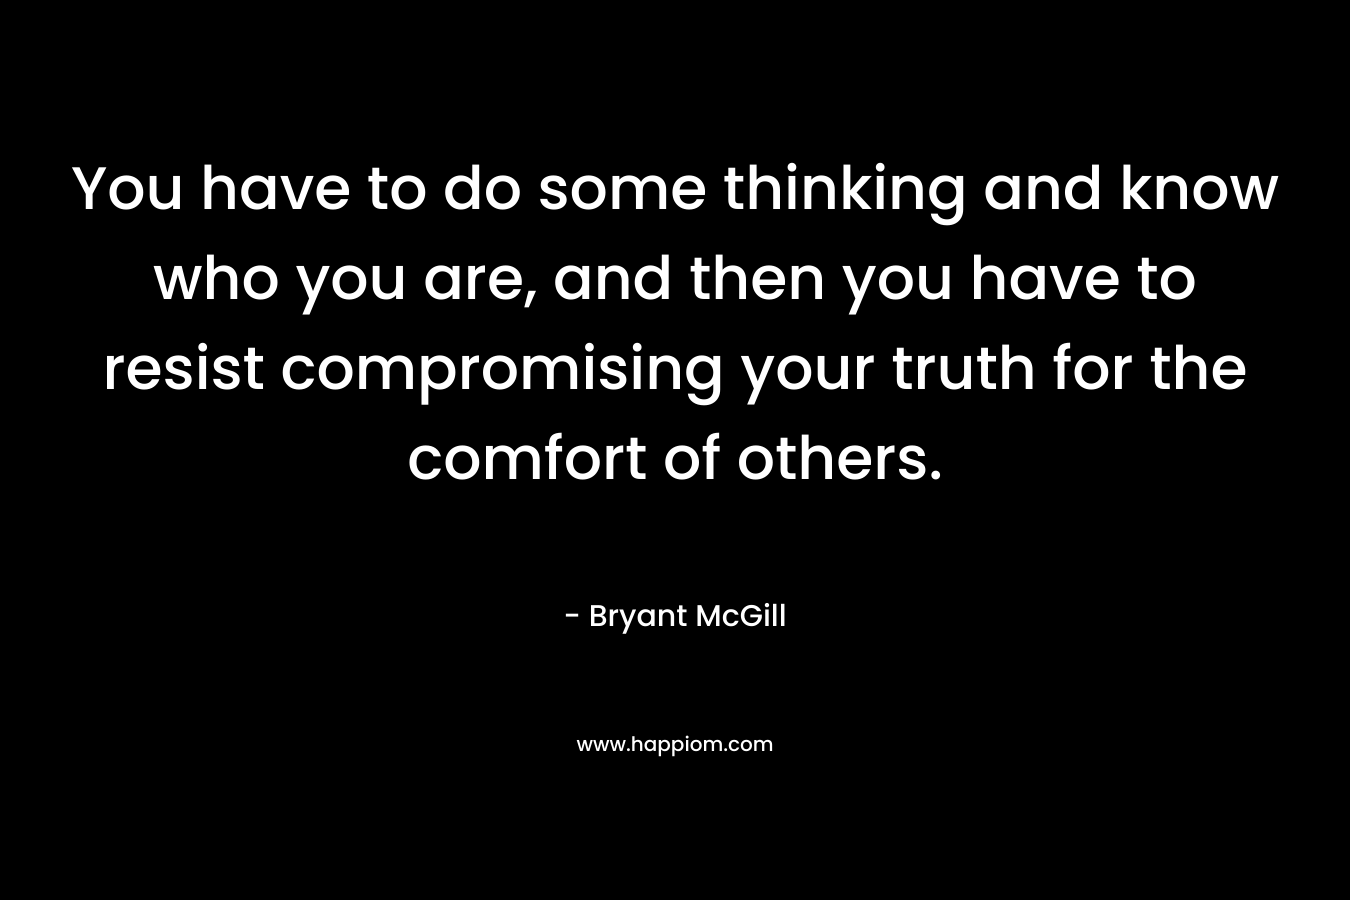 You have to do some thinking and know who you are, and then you have to resist compromising your truth for the comfort of others. – Bryant McGill